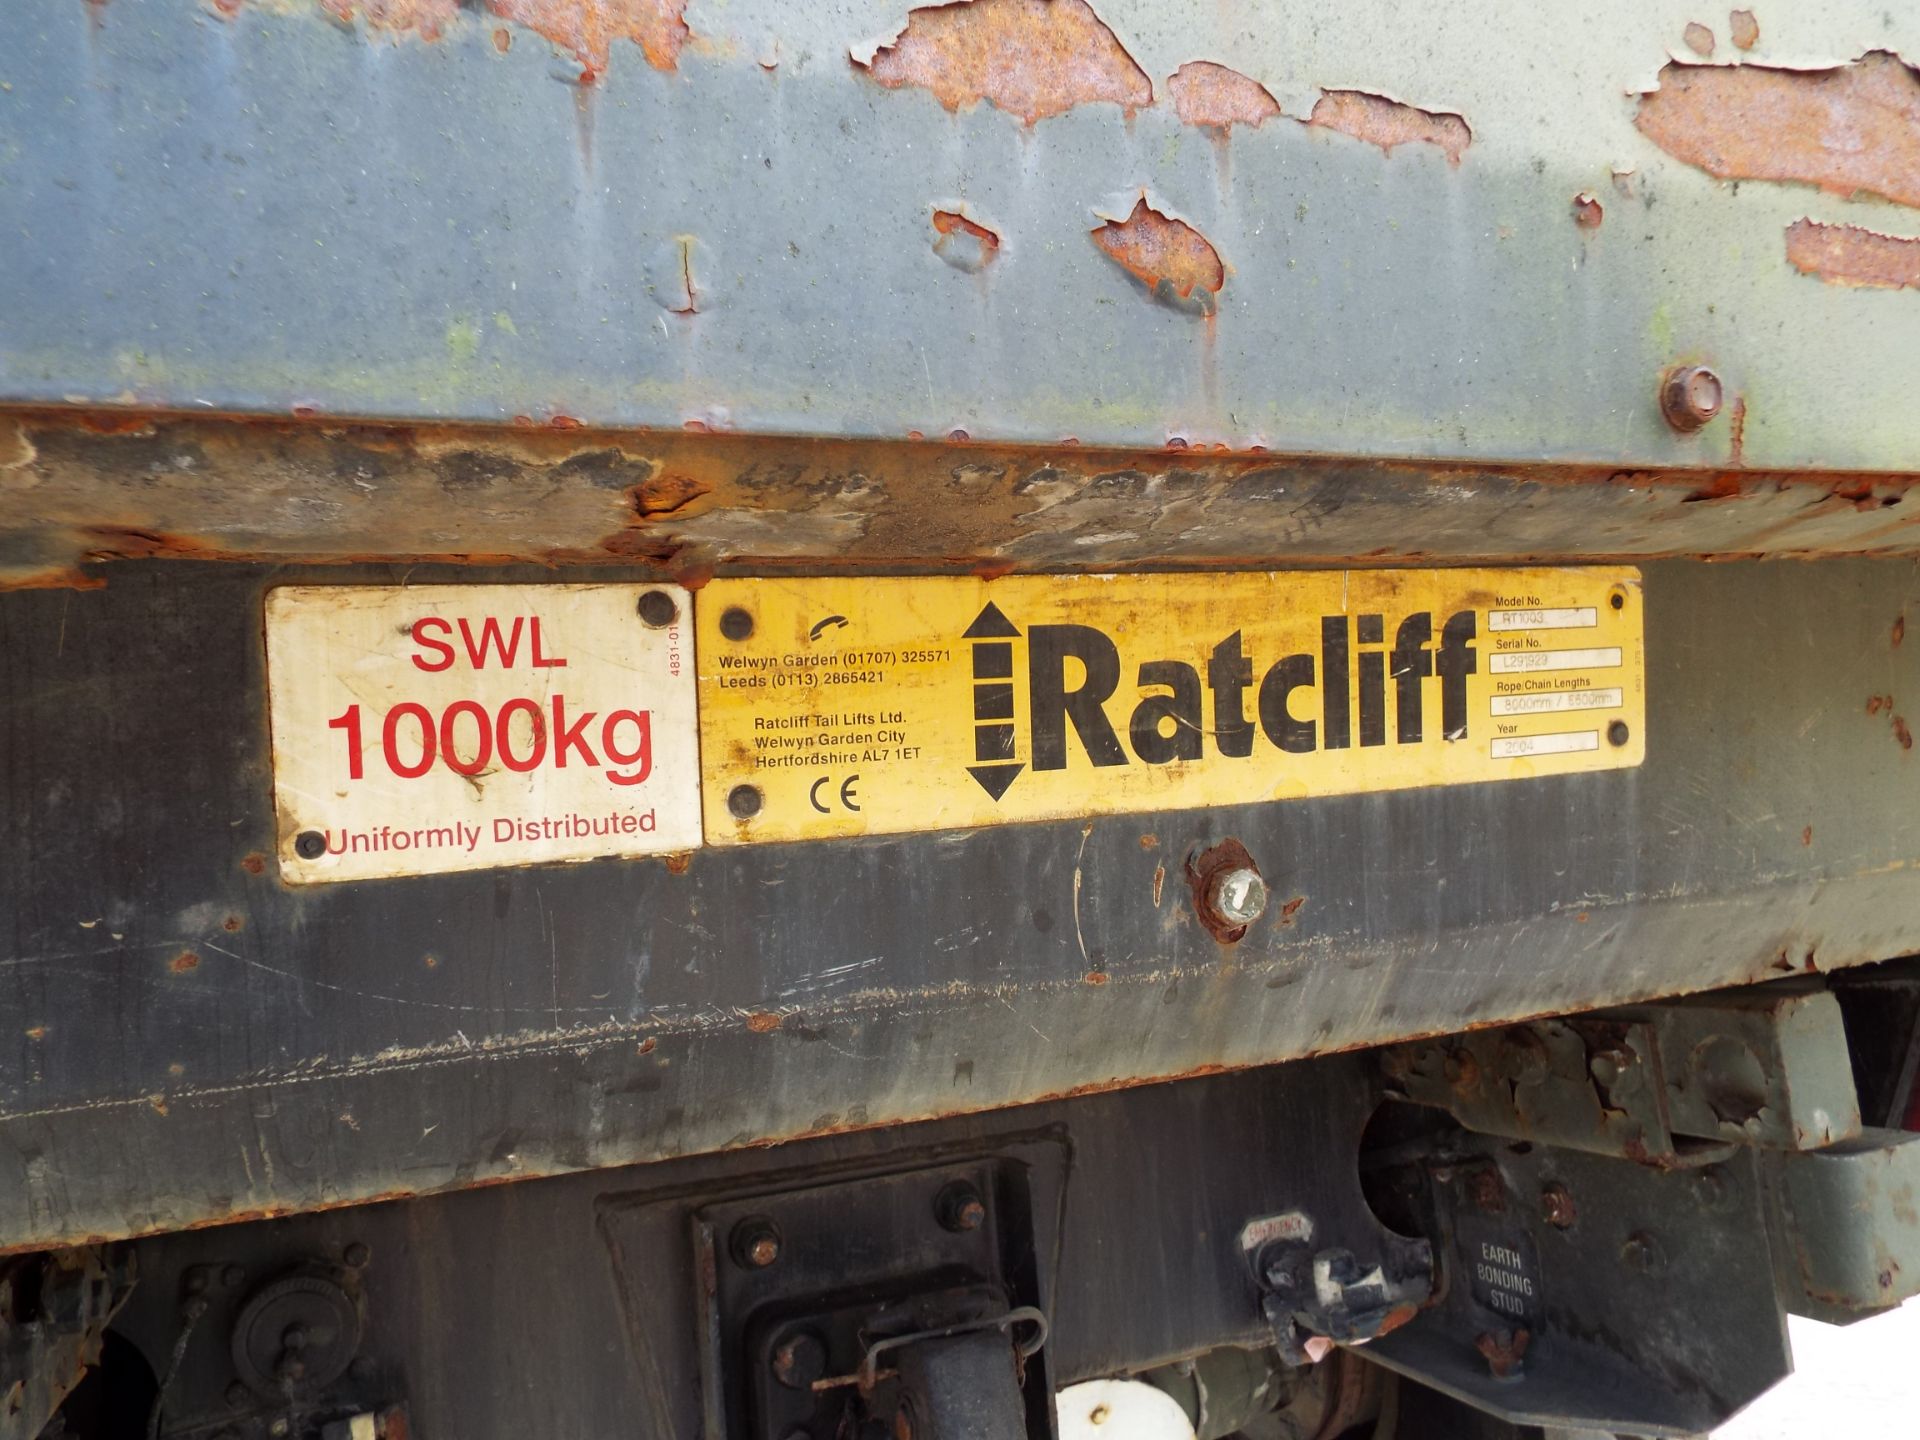 Leyland Daf 45/150 4 x 4 with Ratcliff 1000Kg Tail Lift - Image 13 of 20